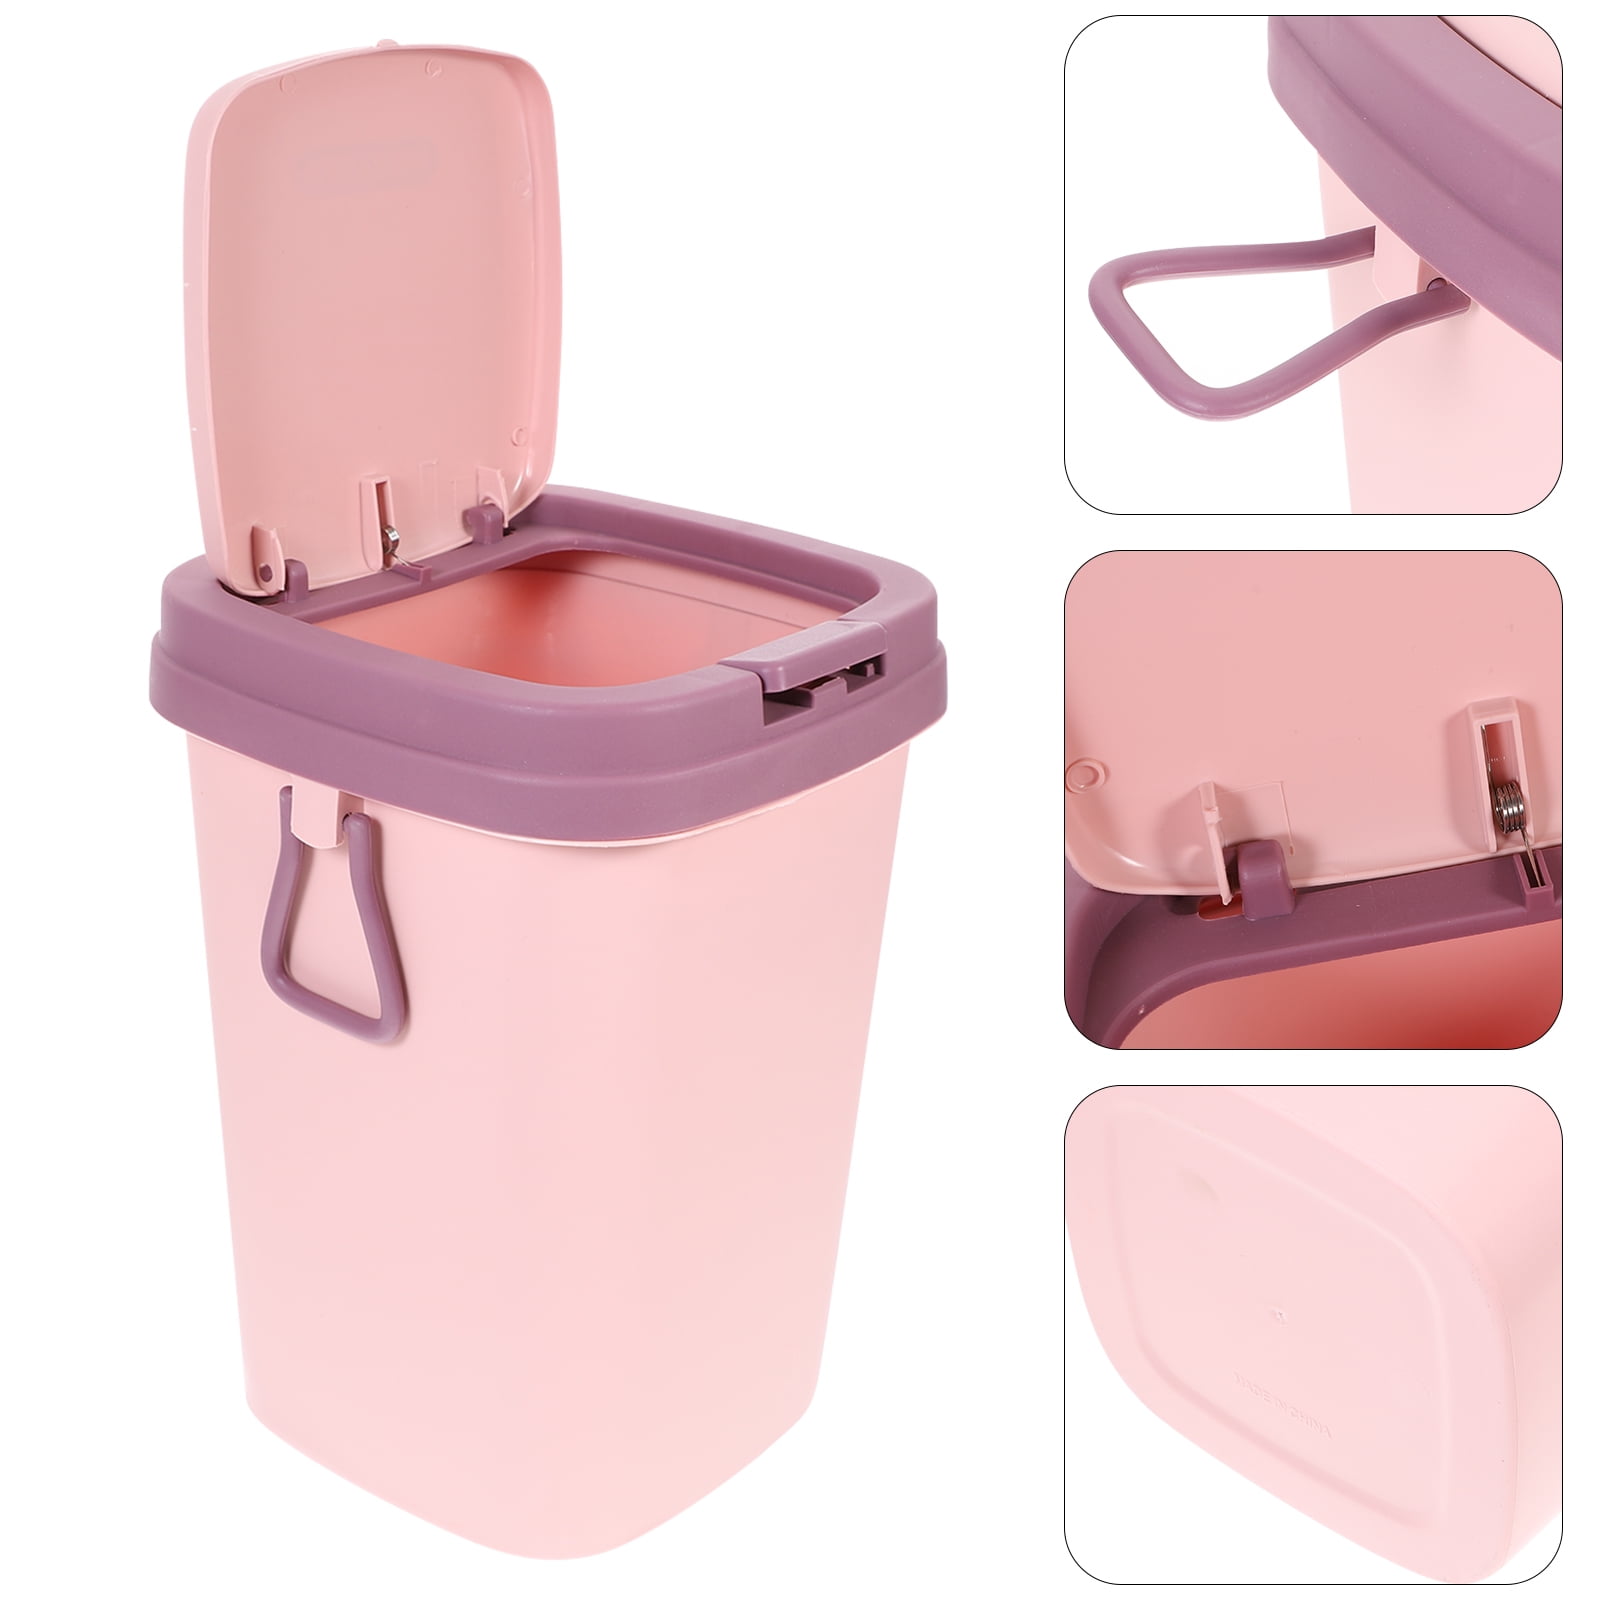 1pc 1l Two-in-one Plastic Garbage Bag Storage Box (17cml X 9cmw X 1cmh) In  Light Luxury Pink Suitable For Living Room, Kitchen, Bathroom, Etc.